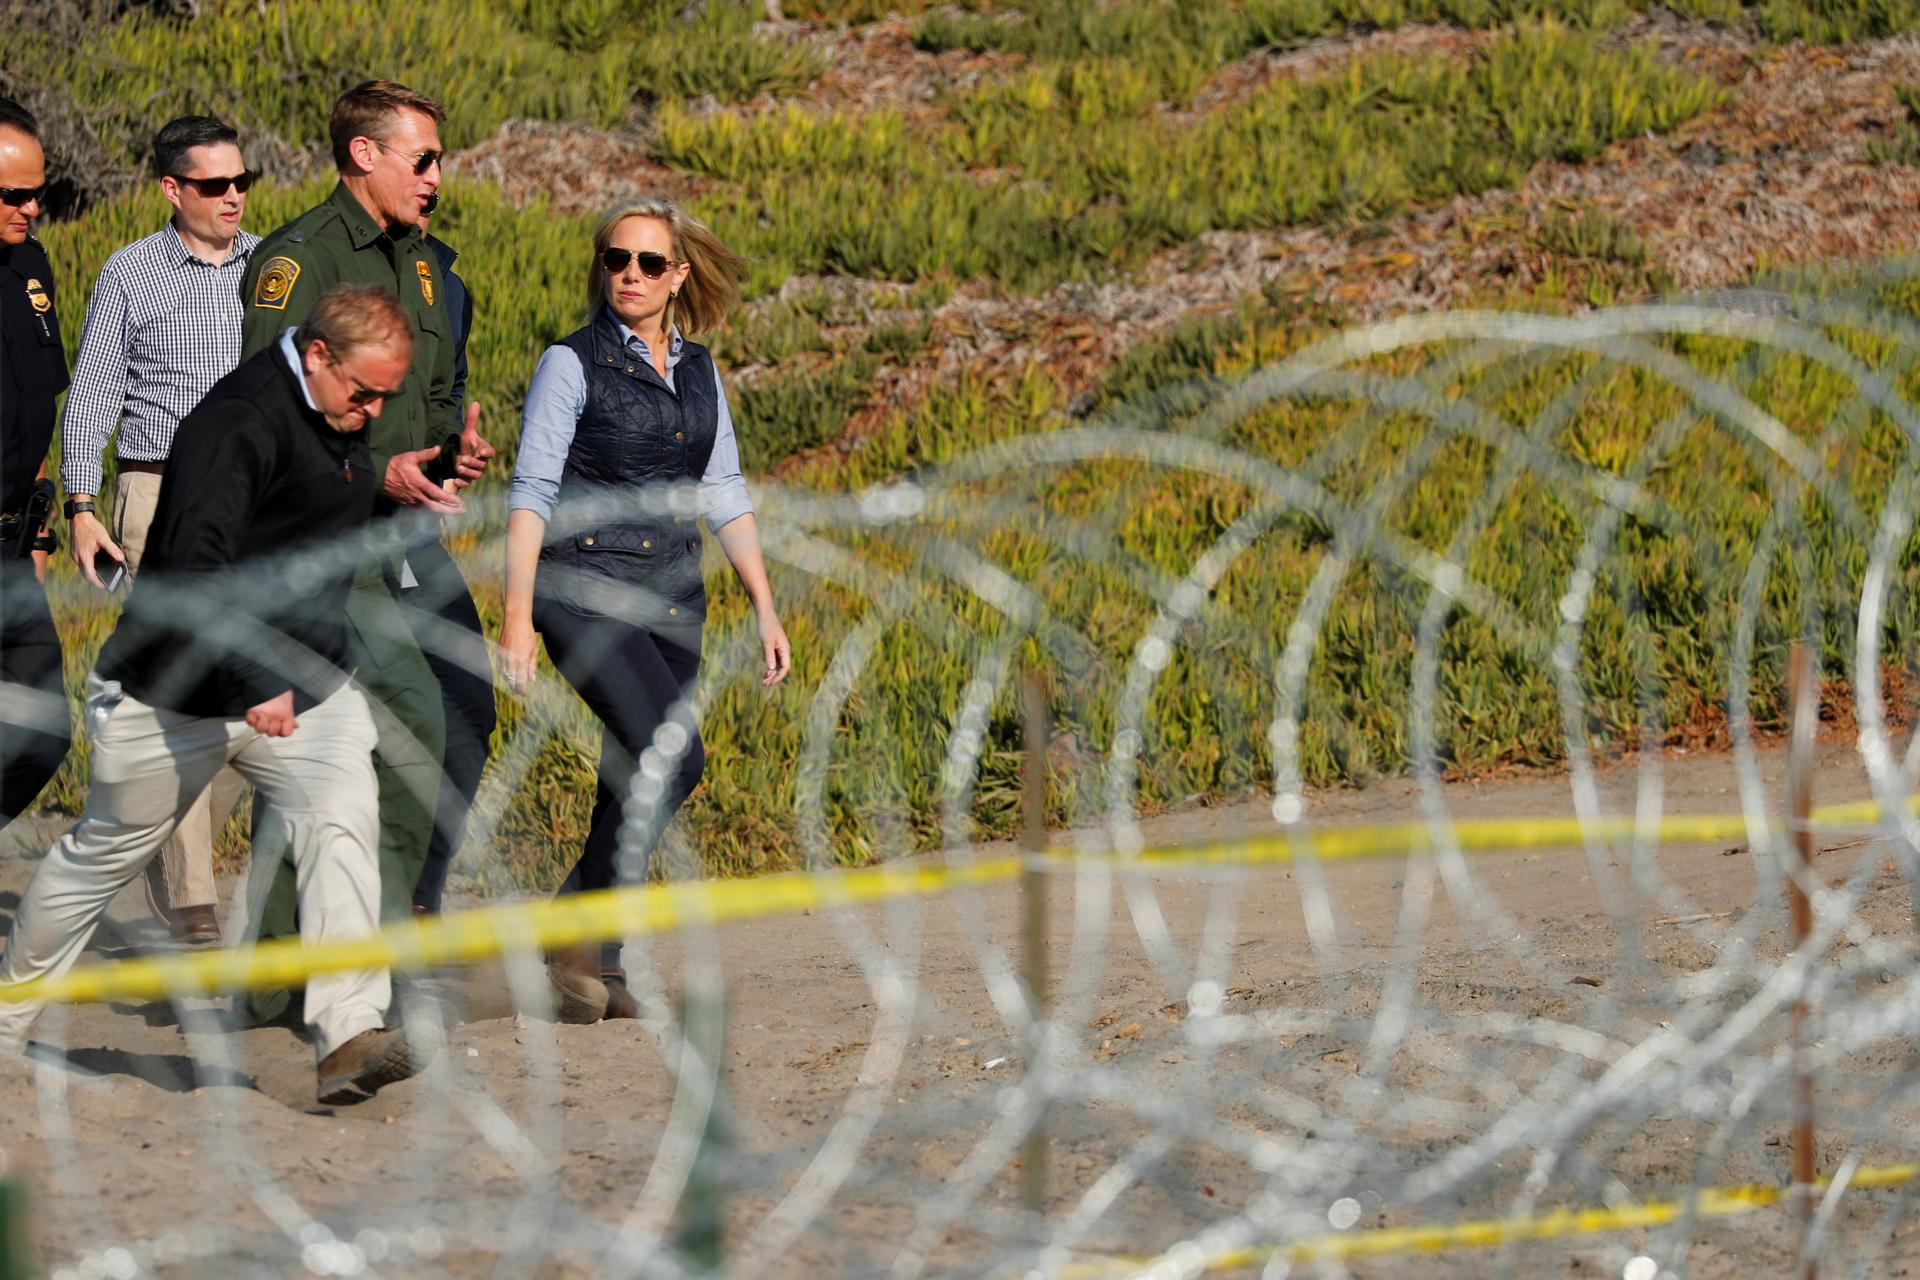 A woman and three men walk next to a fence with razor wire.